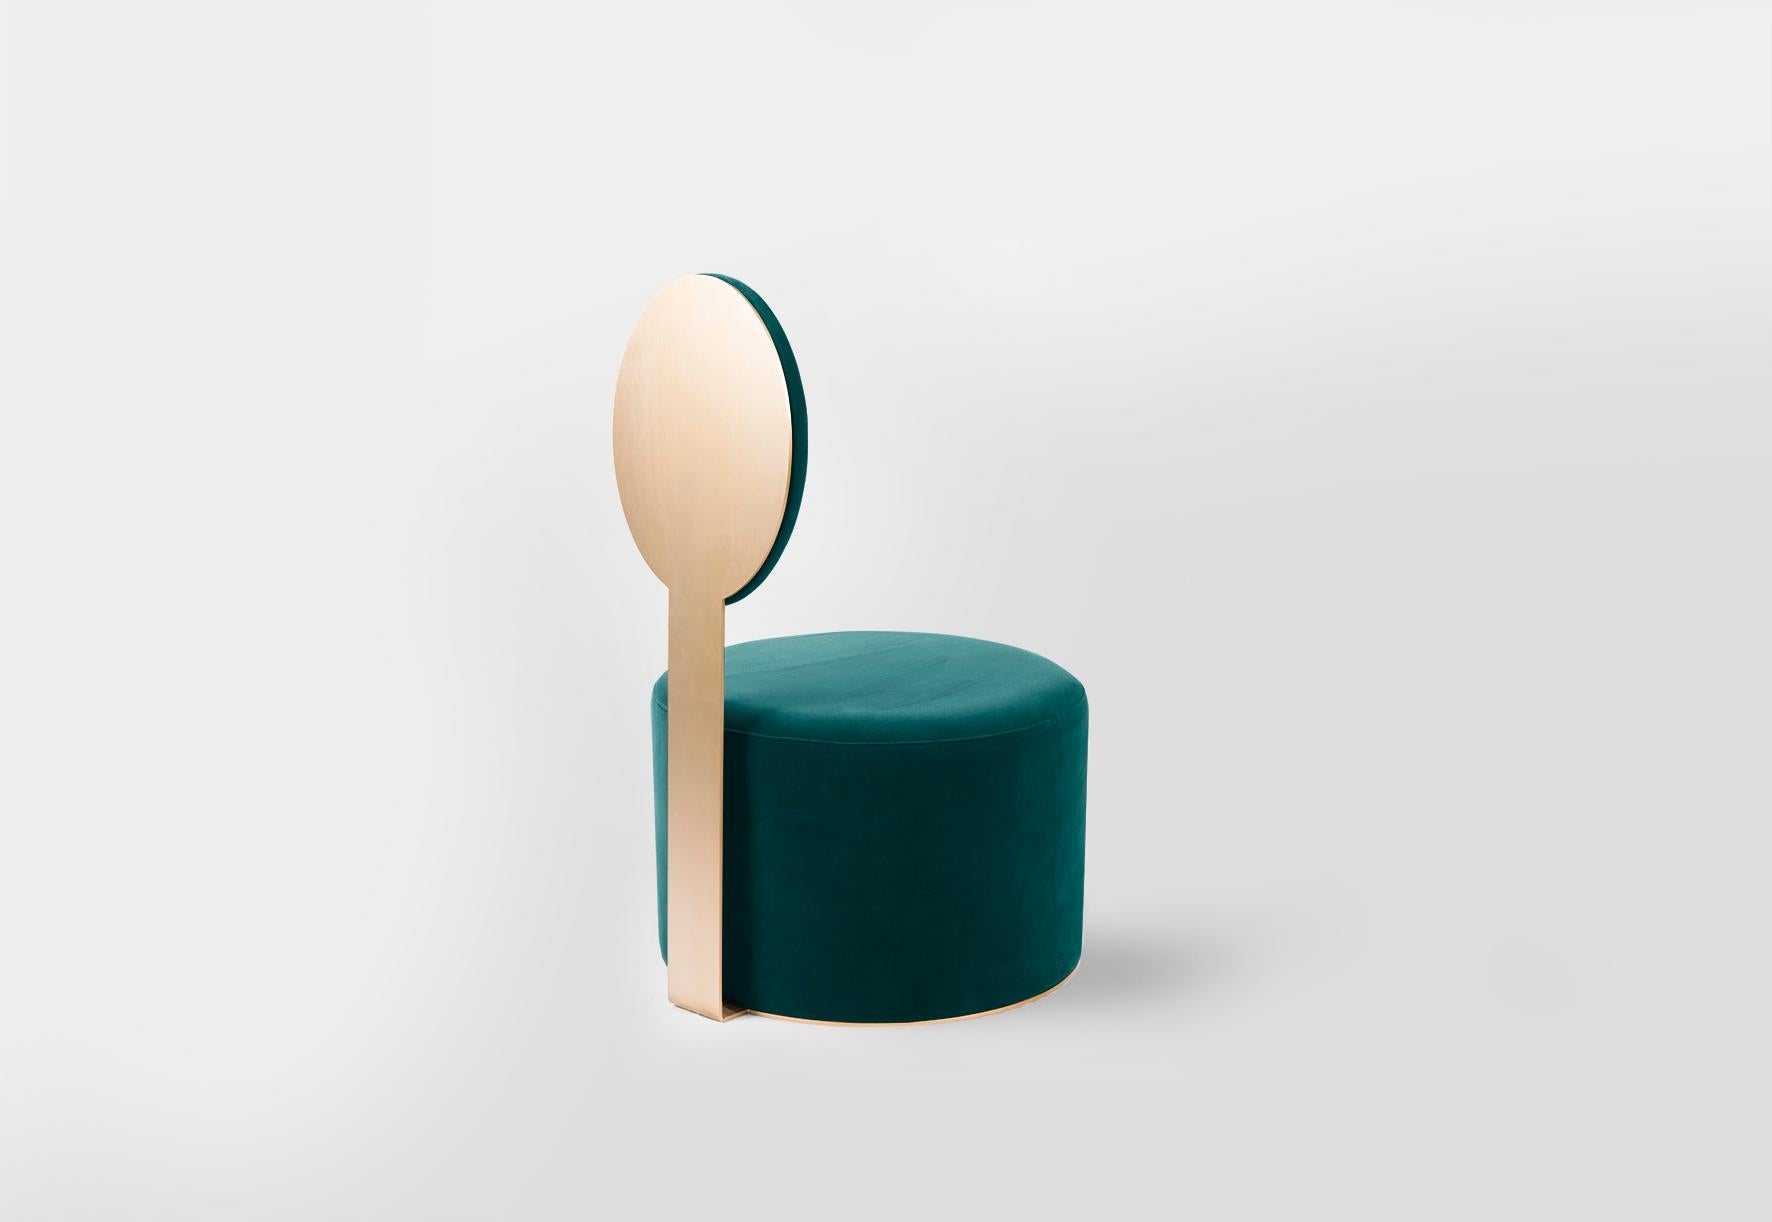 The Pop chair is a lounge chair imagined in its most simple form. Isolating the seat and the back and connecting them with a single metal piece. The clean profile is striking in its simplicity as well as allowing it to slip seamlessly into elegant